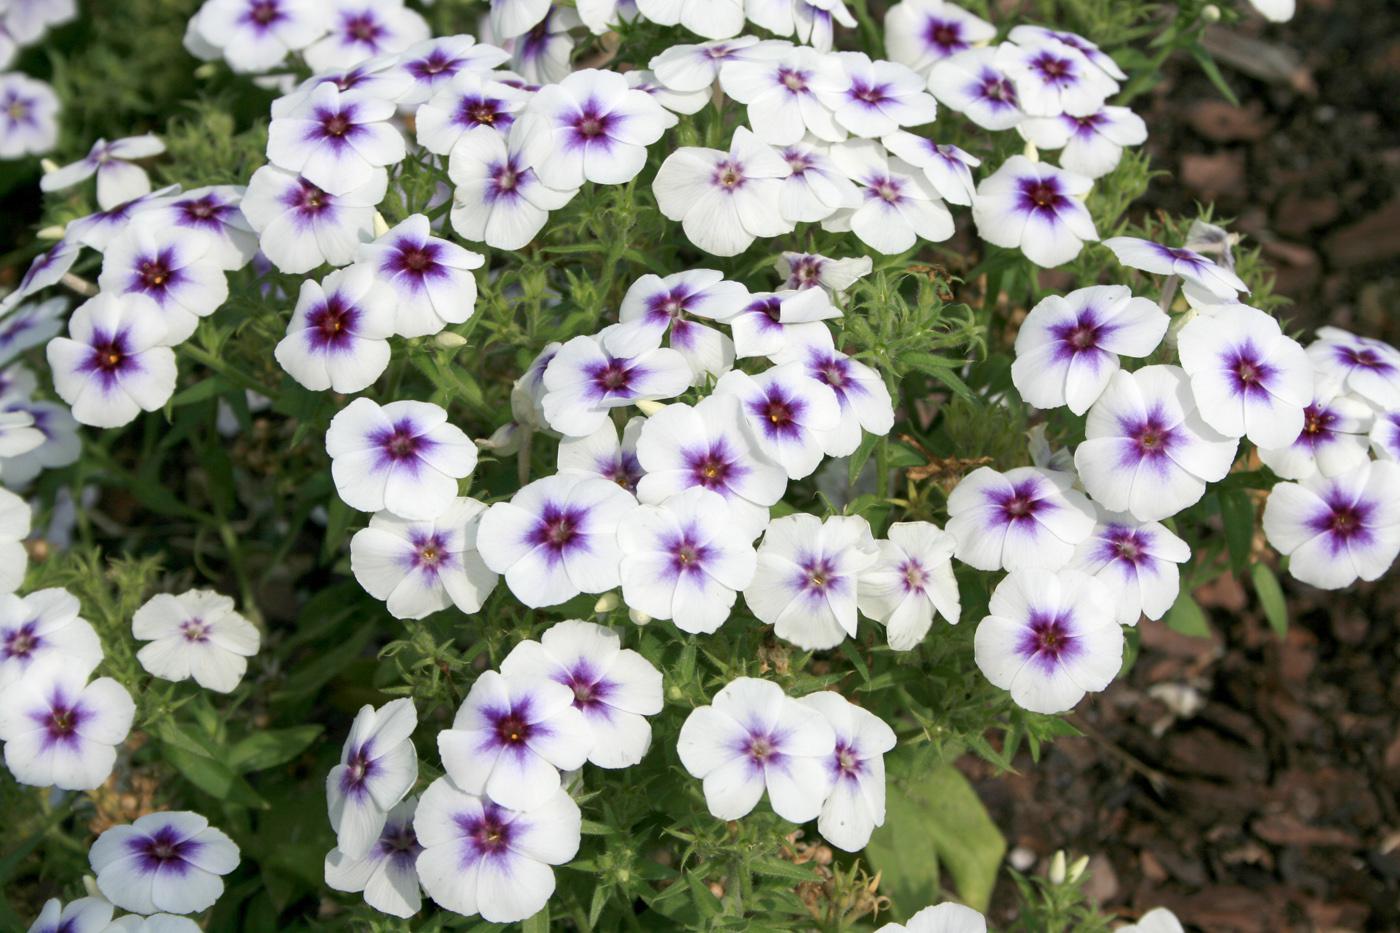 This 21st Century Blue Star phlox is easy to grow and results in full, mounded plants. Strong flower production lasts from spring until frost, and the plant can tolerate summer heat well. 